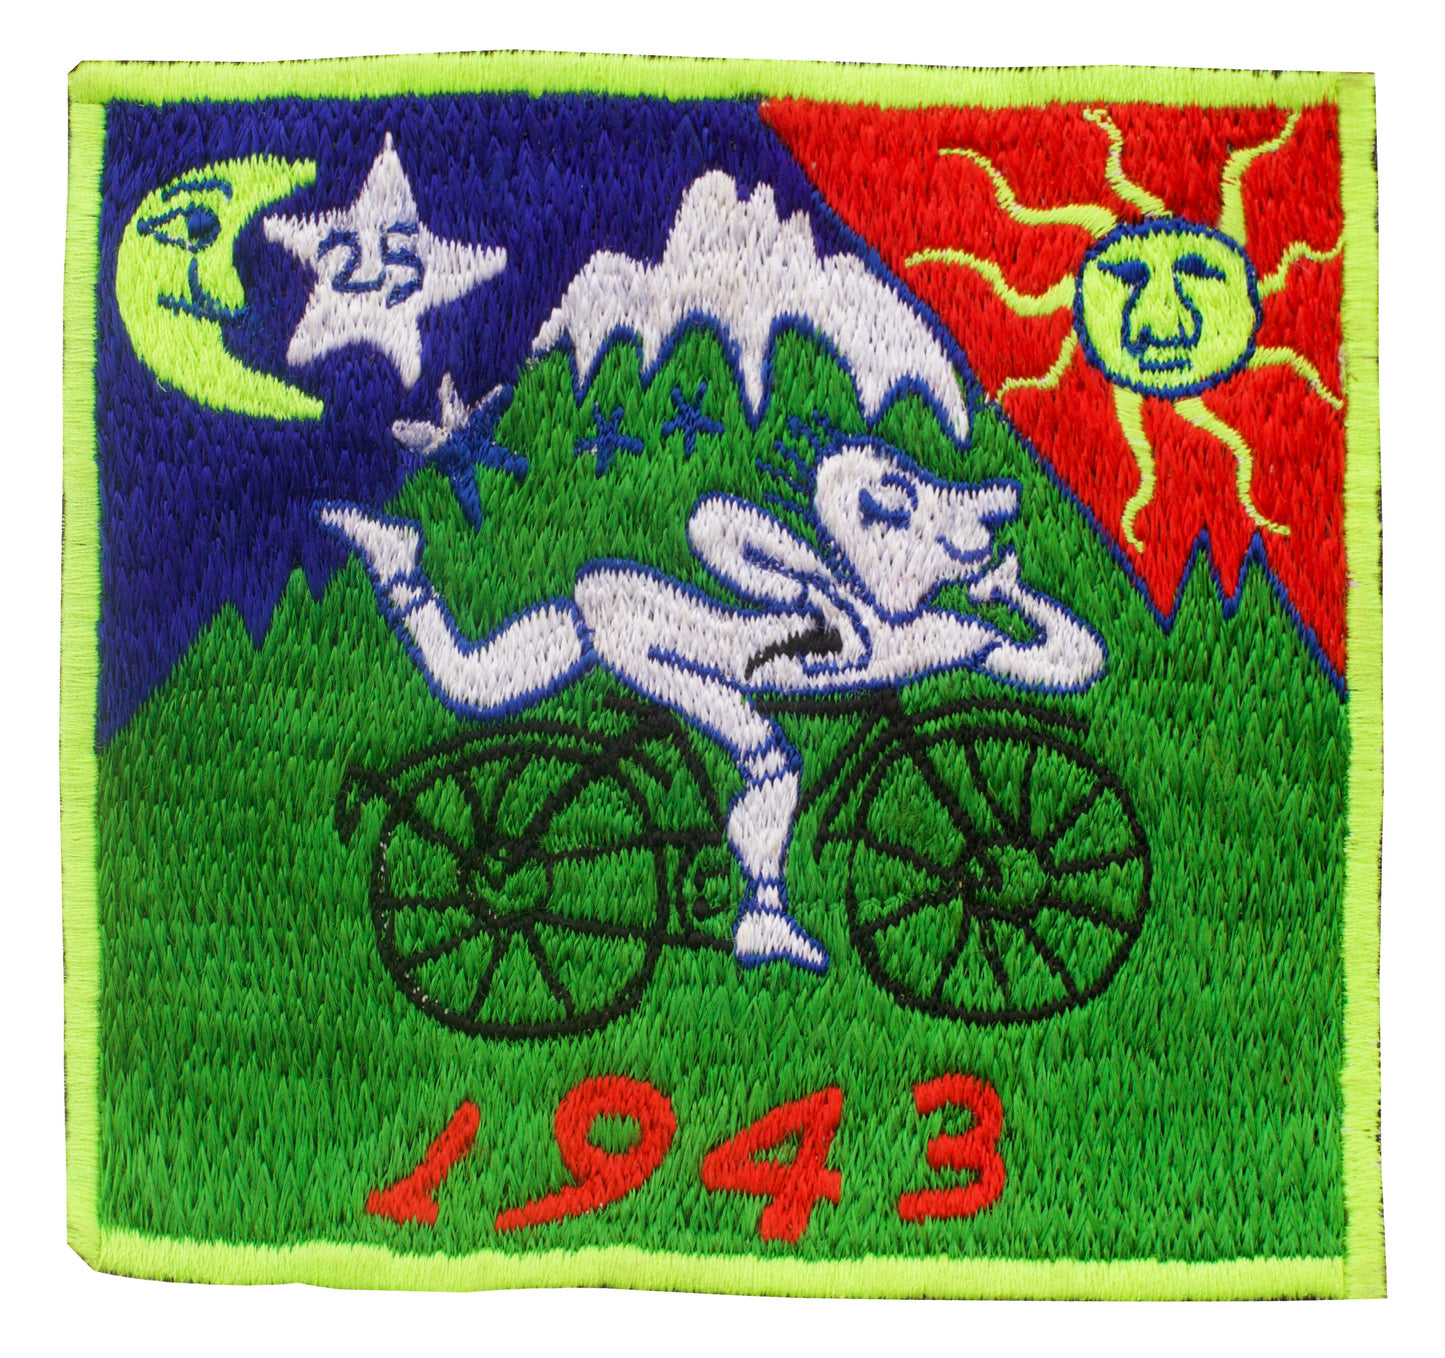 Bicycle Day LSD Fisher Hat UV blacklight glowing with embroidery patch Albert Hofmann vintage acid discovery psytrance psychedelic goatrance